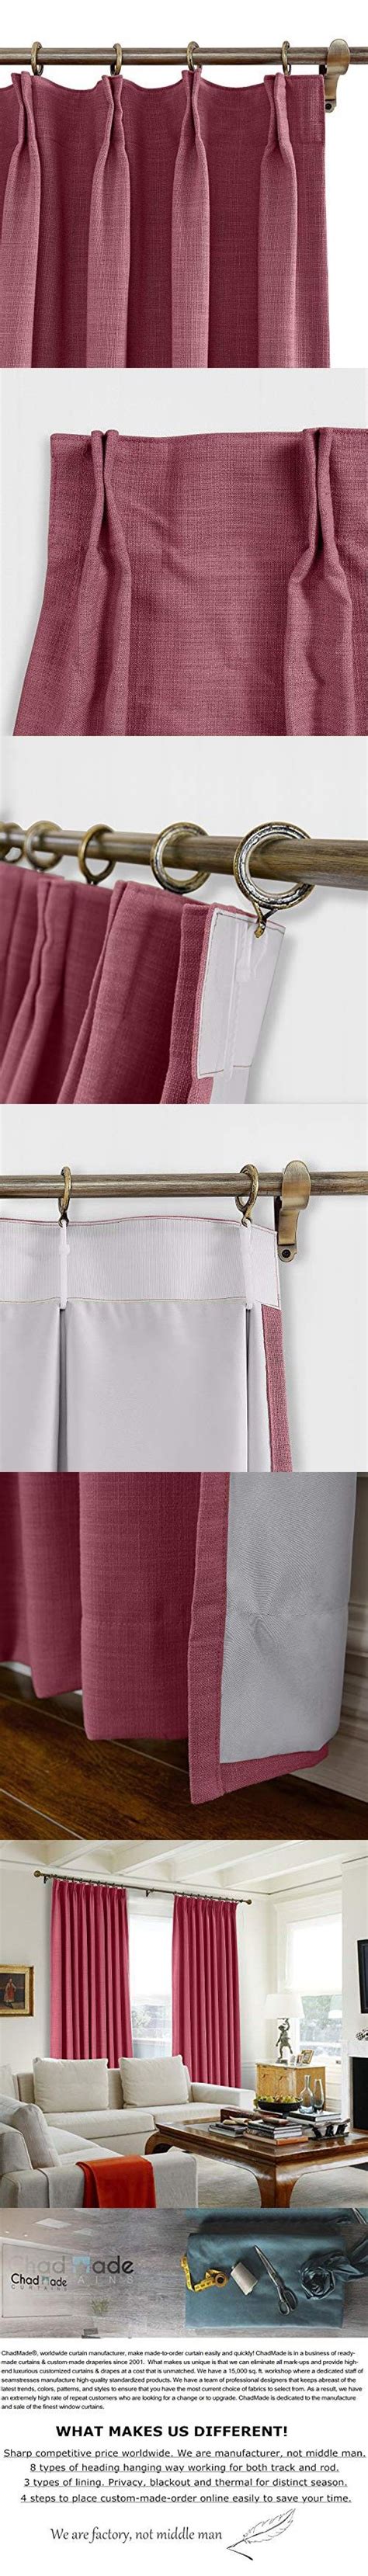 Details image of sliding patio door window panel curtains. ChadMade 50"W x 96" L Polyester Linen Drapes with Blackout Lining Pinch Pleat Curtain for ...